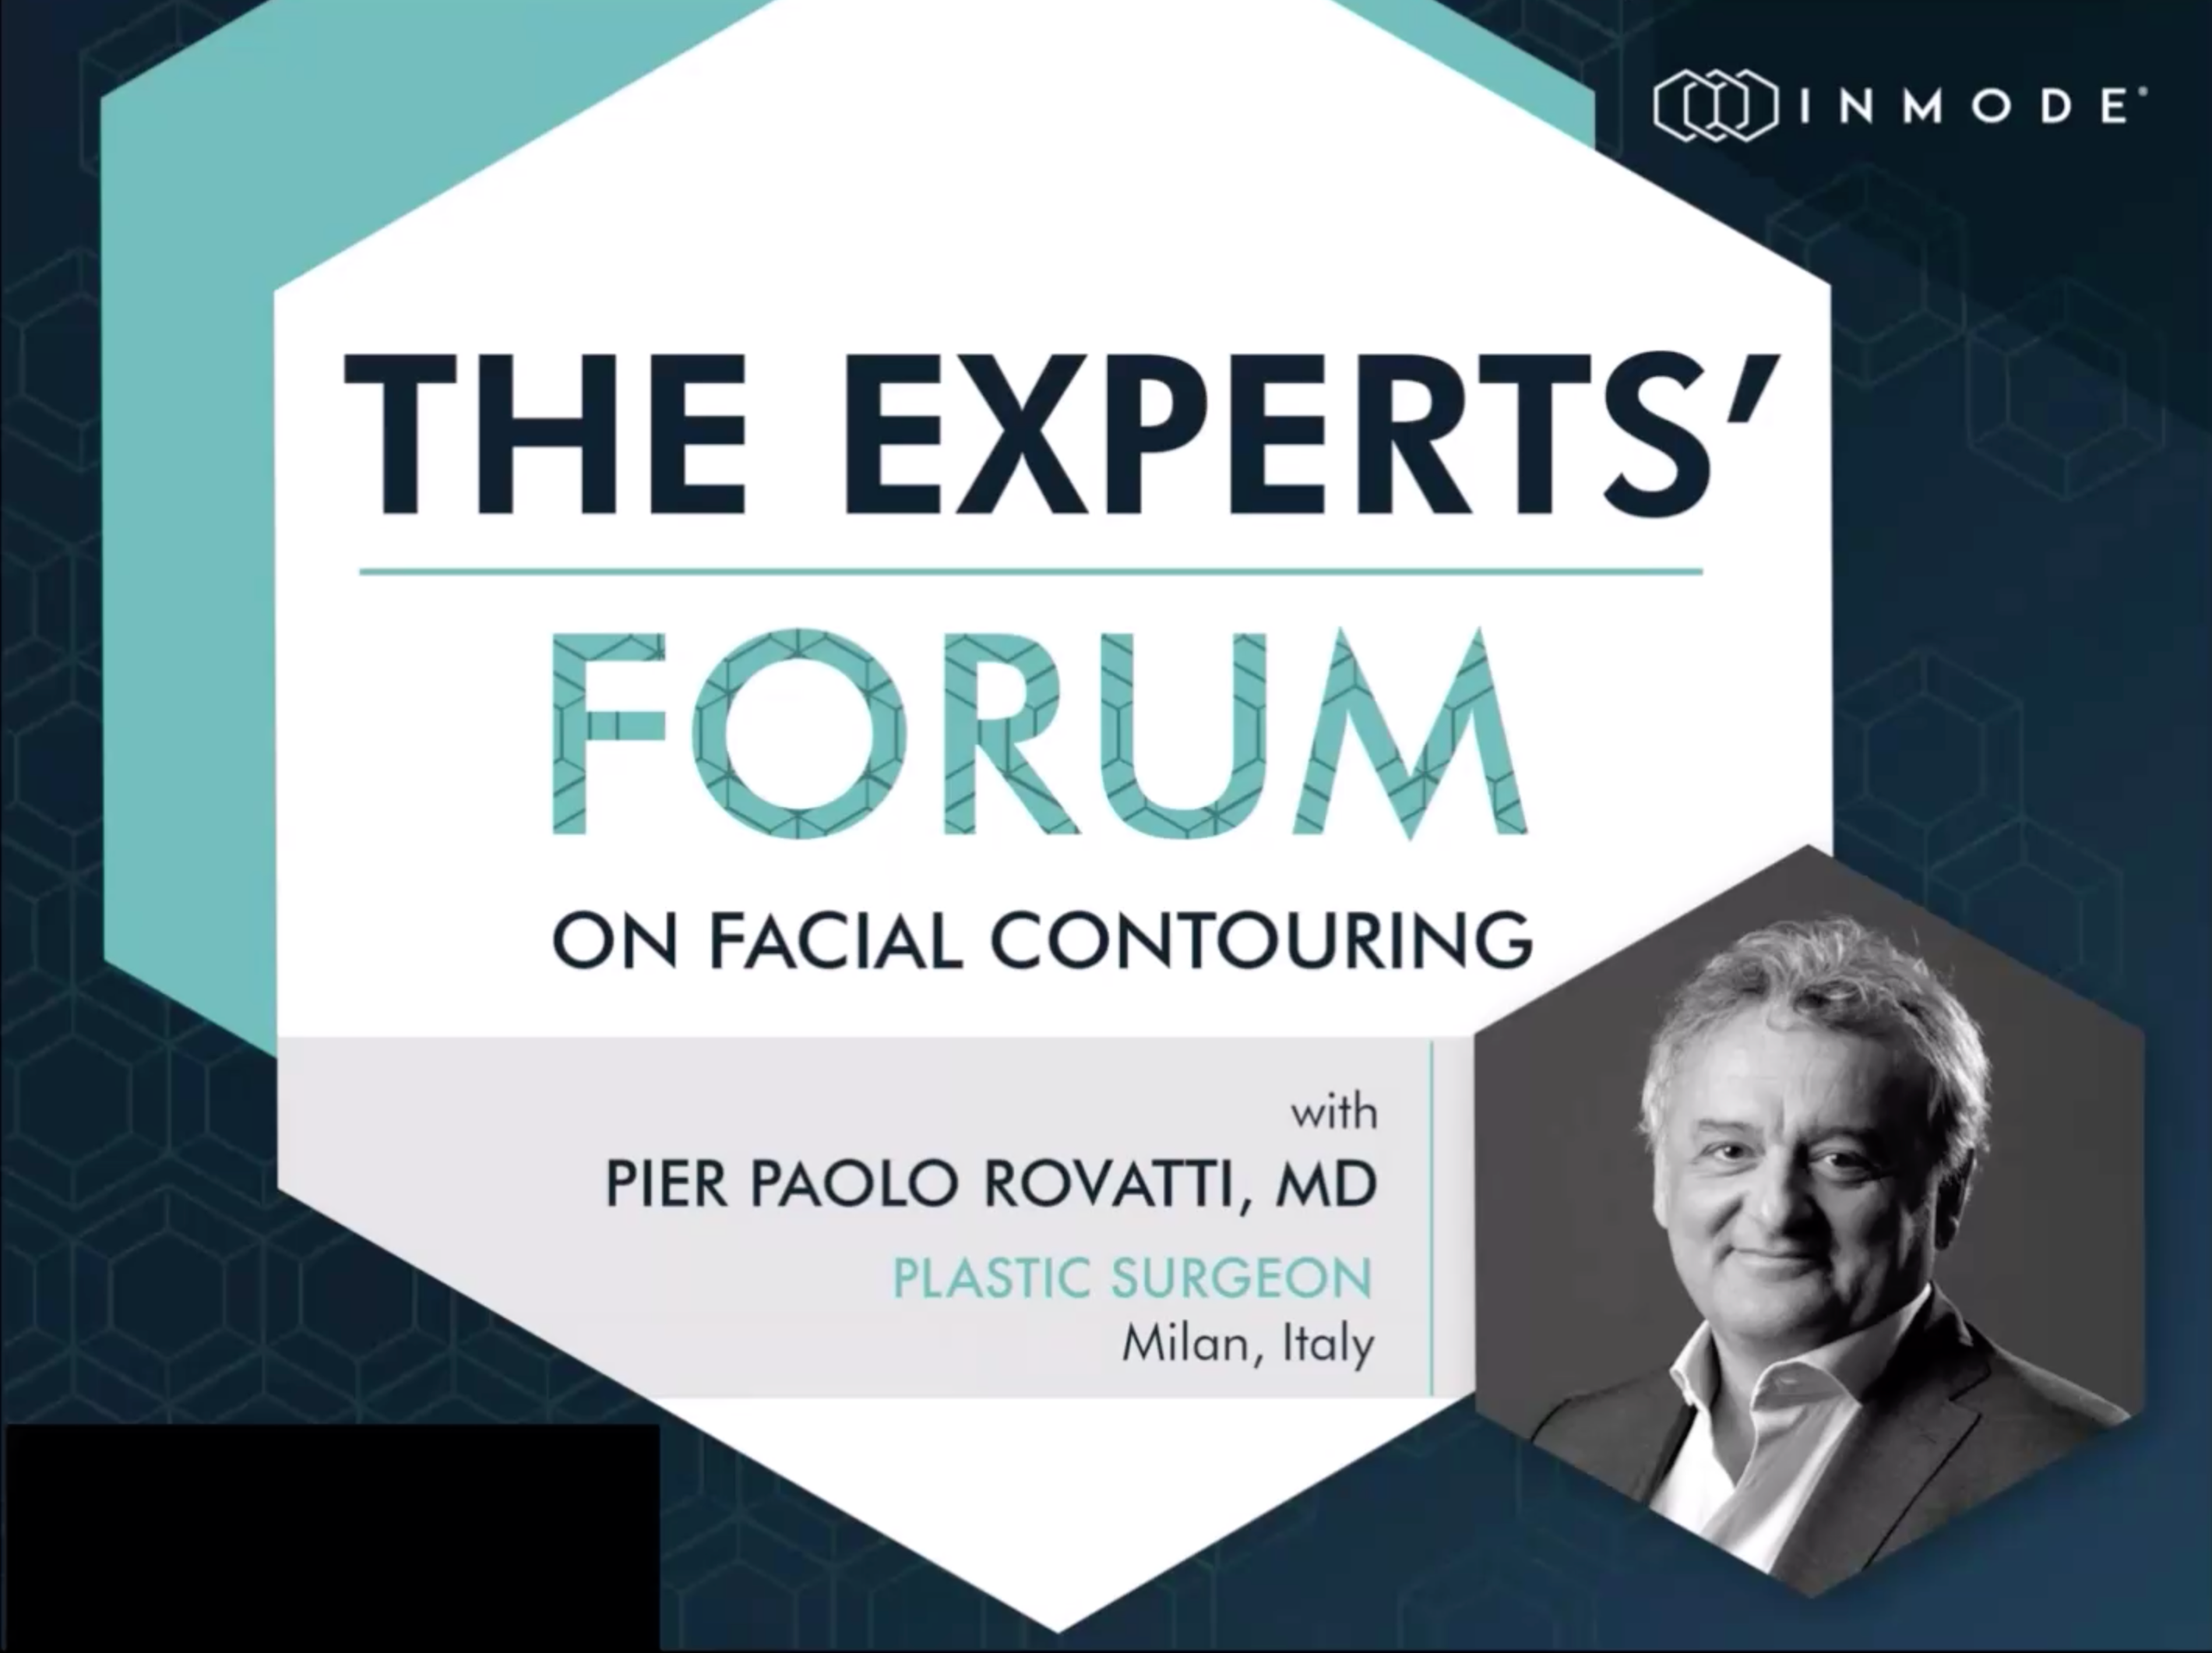 The Experts Forum on Facial Contouring